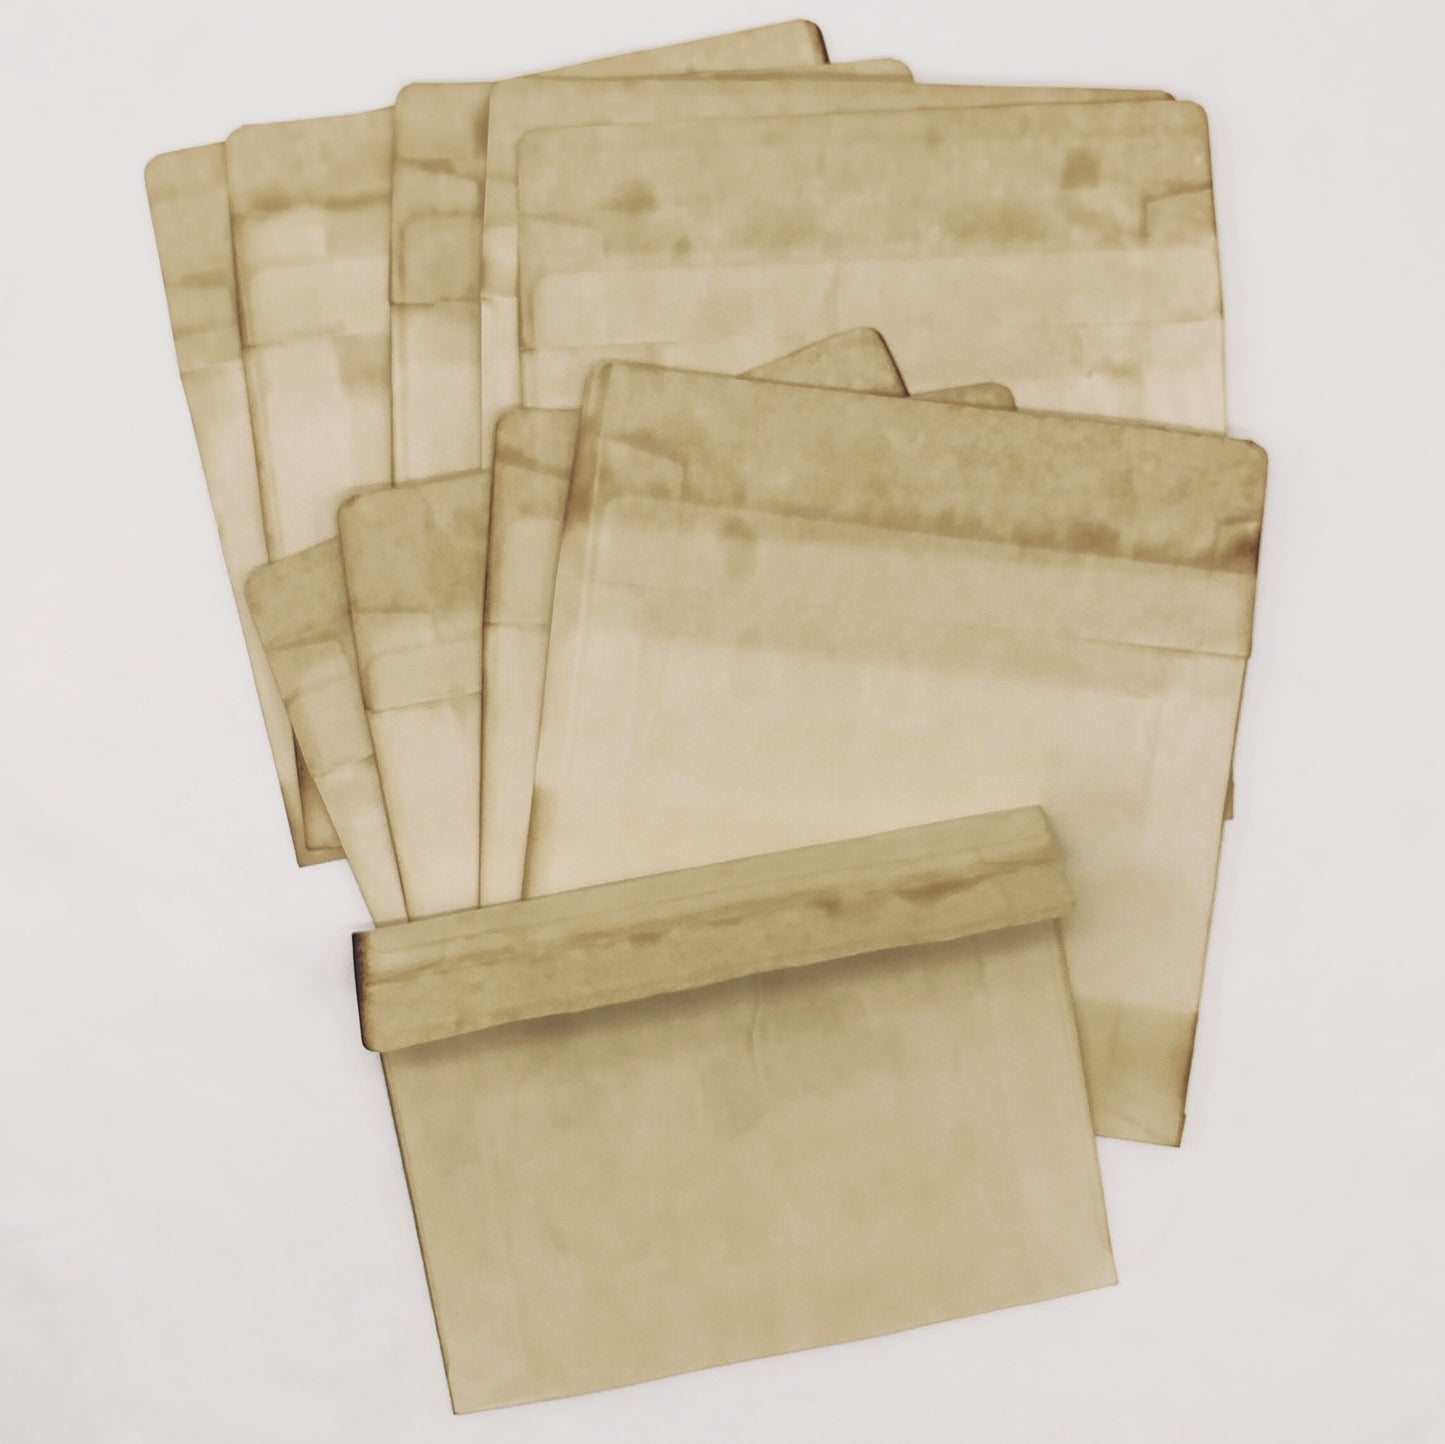 30 Coffee Dyed Envelopes, Dyed Envelopes Pack